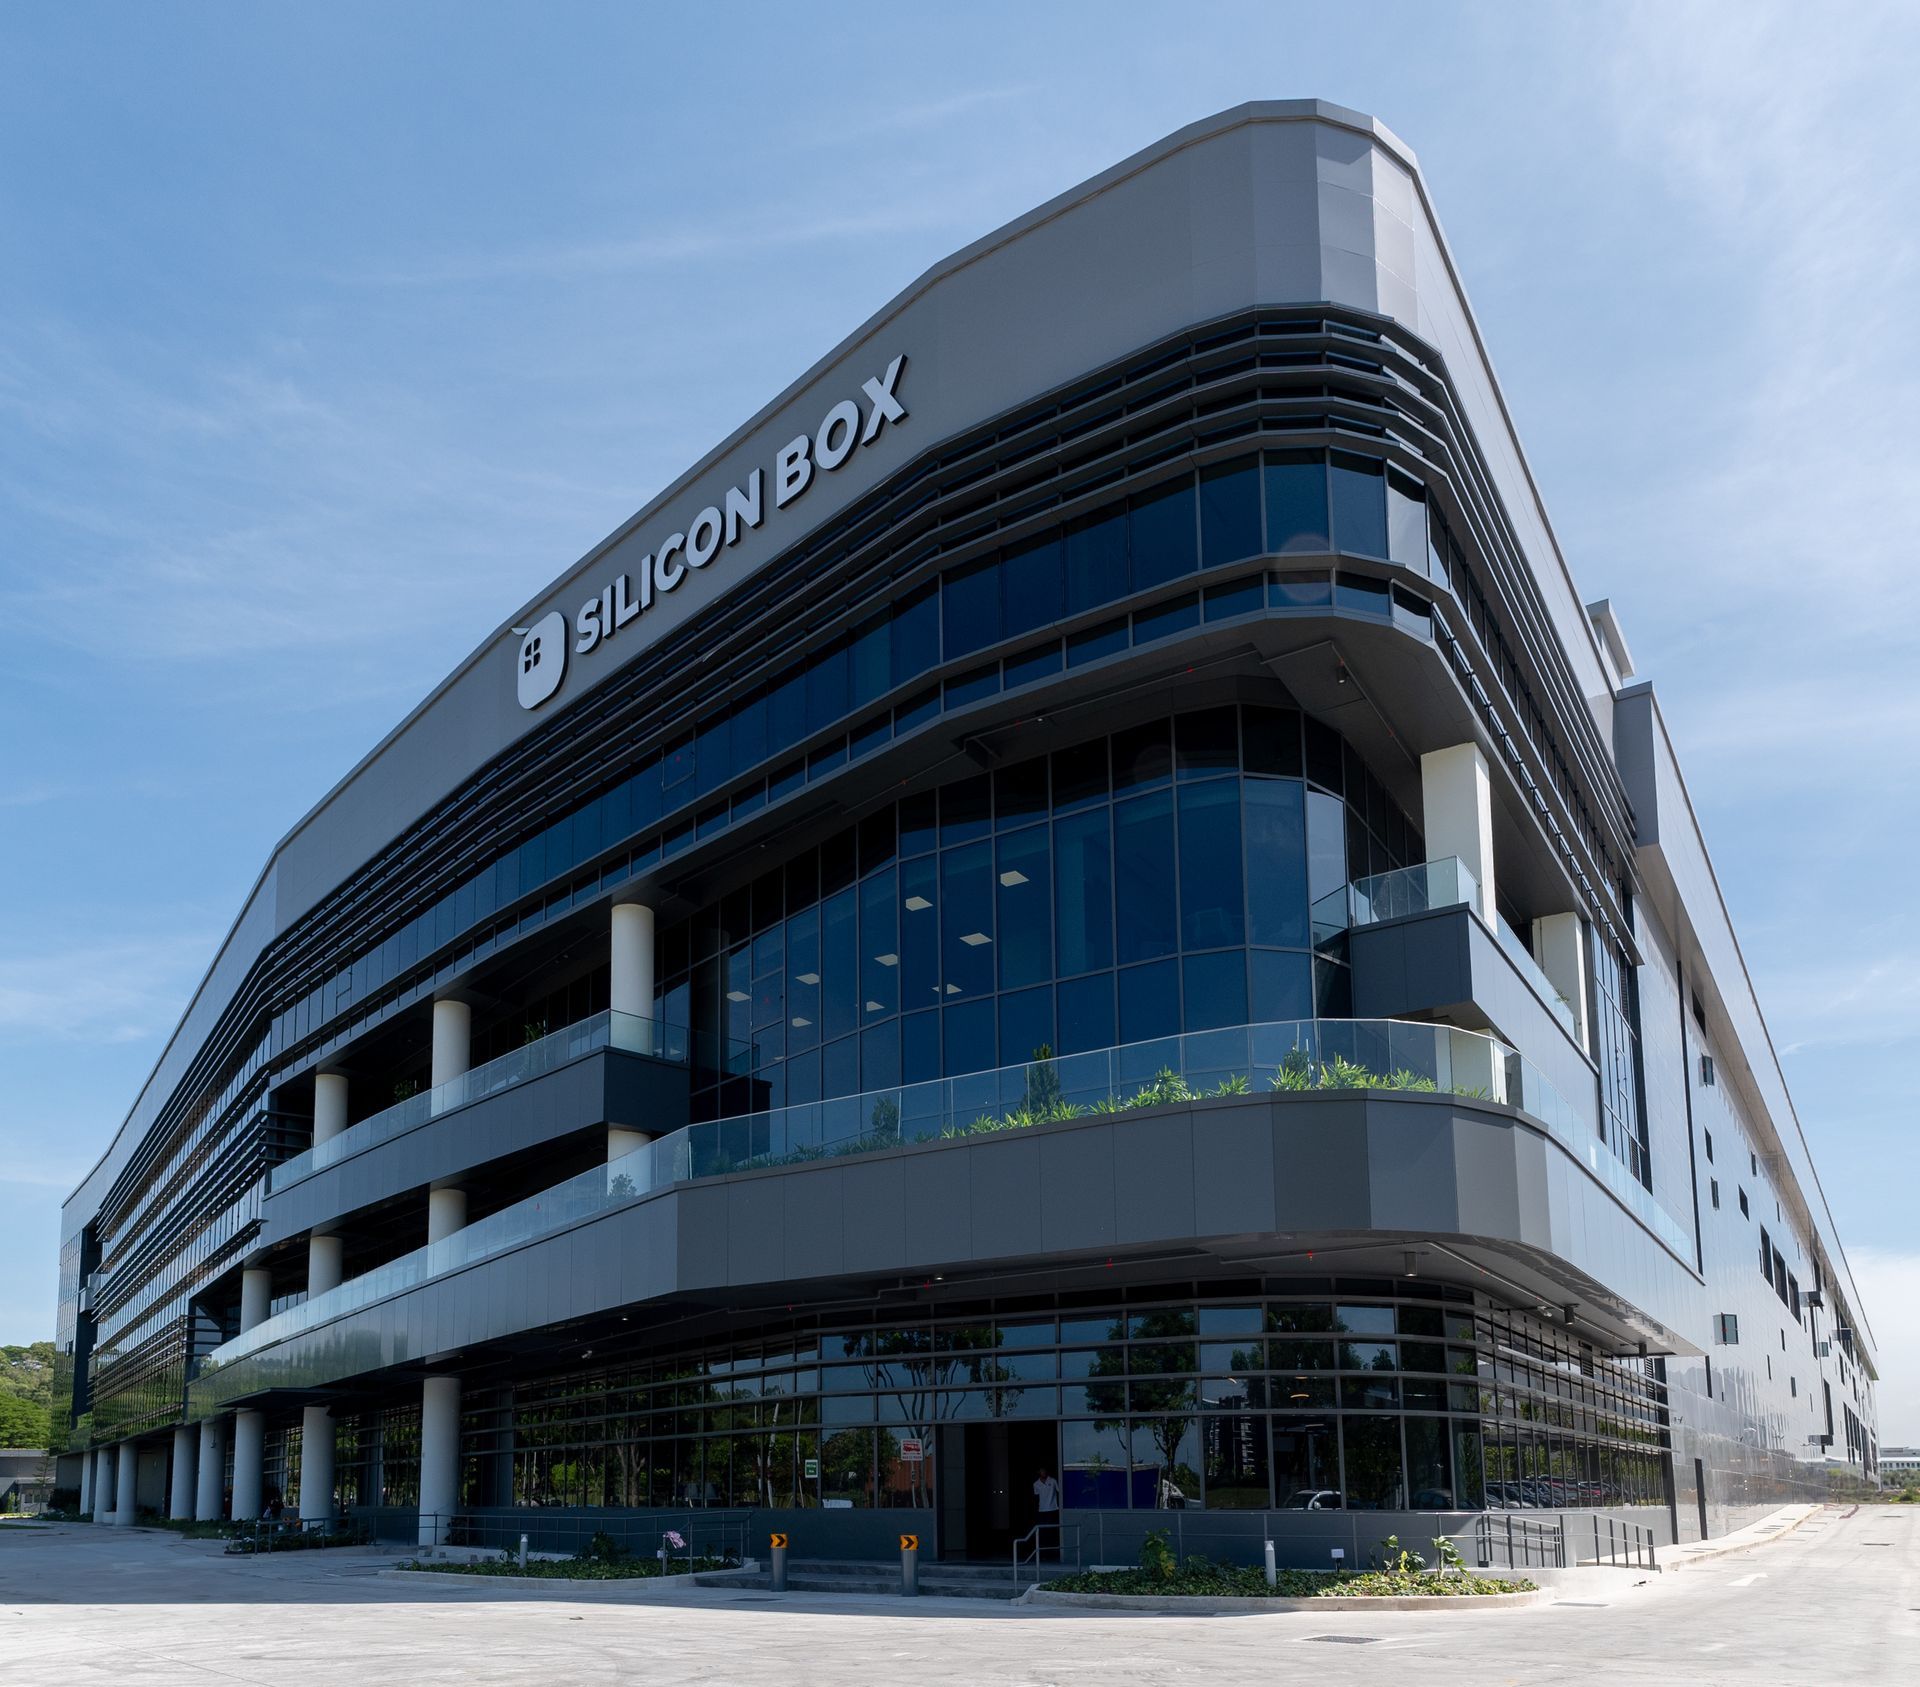 Image of Silicon Box Factory in Singapore